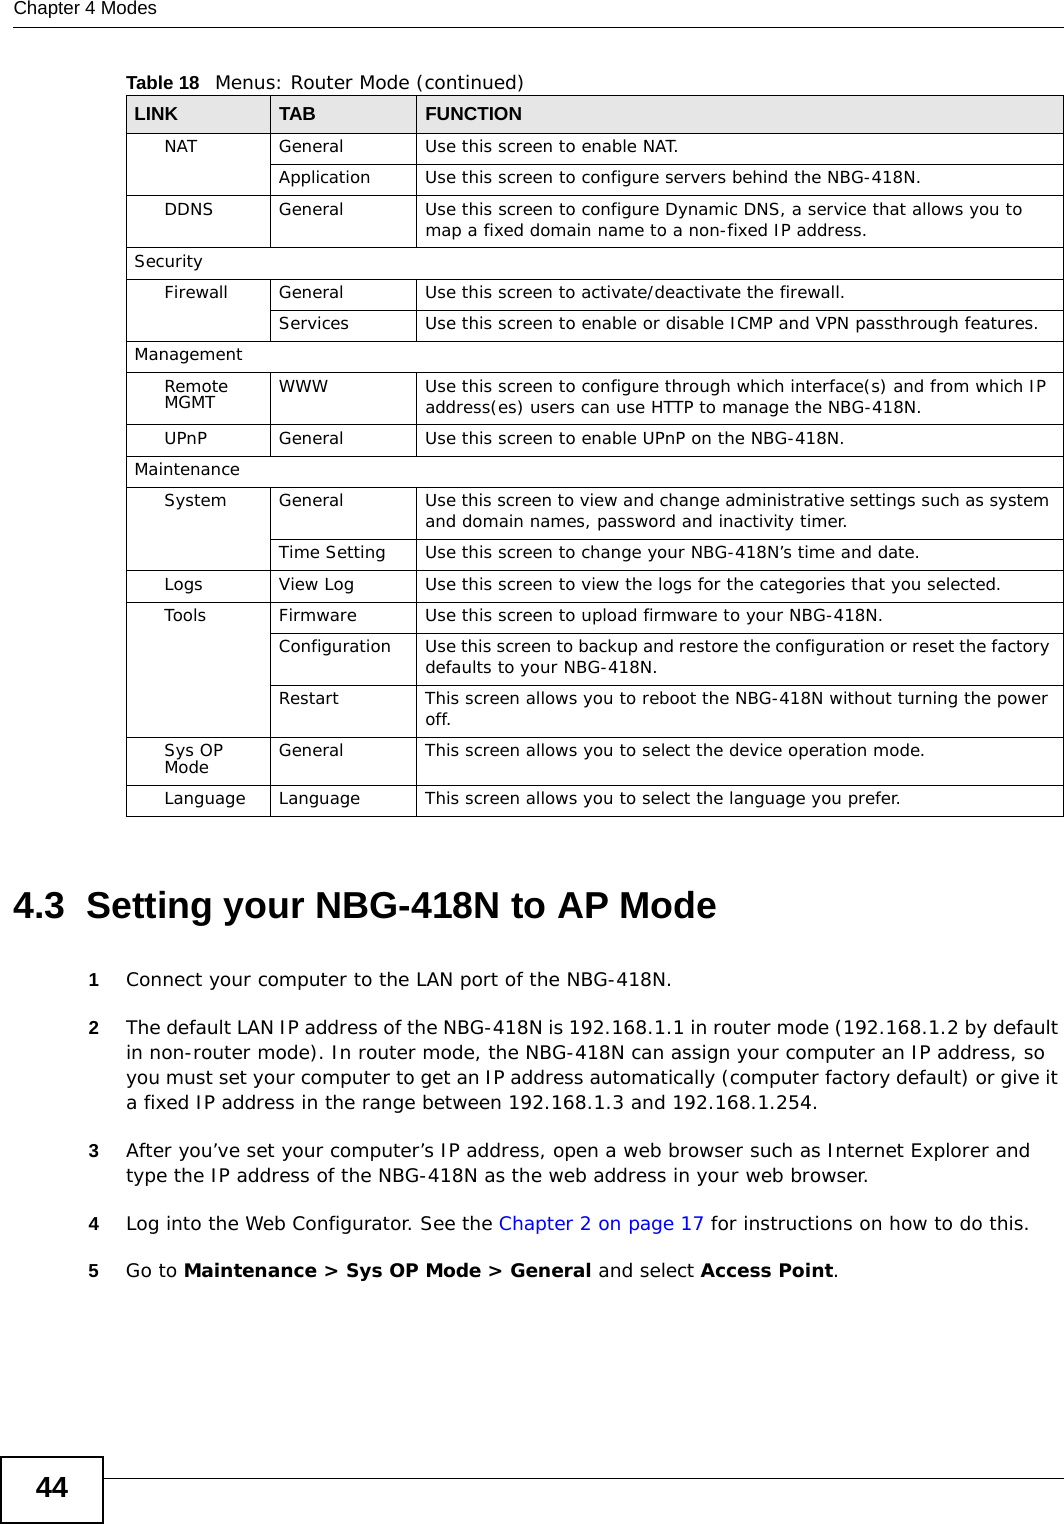 Chapter 4 Modes444.3  Setting your NBG-418N to AP Mode1Connect your computer to the LAN port of the NBG-418N. 2The default LAN IP address of the NBG-418N is 192.168.1.1 in router mode (192.168.1.2 by default in non-router mode). In router mode, the NBG-418N can assign your computer an IP address, so you must set your computer to get an IP address automatically (computer factory default) or give it a fixed IP address in the range between 192.168.1.3 and 192.168.1.254.3After you’ve set your computer’s IP address, open a web browser such as Internet Explorer and type the IP address of the NBG-418N as the web address in your web browser.4Log into the Web Configurator. See the Chapter 2 on page 17 for instructions on how to do this.5Go to Maintenance &gt; Sys OP Mode &gt; General and select Access Point.NATGeneral Use this screen to enable NAT.Application Use this screen to configure servers behind the NBG-418N.DDNS General Use this screen to configure Dynamic DNS, a service that allows you to map a fixed domain name to a non-fixed IP address.SecurityFirewall General Use this screen to activate/deactivate the firewall.Services Use this screen to enable or disable ICMP and VPN passthrough features.ManagementRemote MGMT WWWUse this screen to configure through which interface(s) and from which IP address(es) users can use HTTP to manage the NBG-418N.UPnPGeneral Use this screen to enable UPnP on the NBG-418N. MaintenanceSystem General Use this screen to view and change administrative settings such as system and domain names, password and inactivity timer.Time Setting Use this screen to change your NBG-418N’s time and date.Logs View Log Use this screen to view the logs for the categories that you selected.Tools Firmware Use this screen to upload firmware to your NBG-418N.Configuration Use this screen to backup and restore the configuration or reset the factory defaults to your NBG-418N. Restart This screen allows you to reboot the NBG-418N without turning the power off.Sys OP Mode General This screen allows you to select the device operation mode.Language Language This screen allows you to select the language you prefer.Table 18   Menus: Router Mode (continued)LINK TABFUNCTION